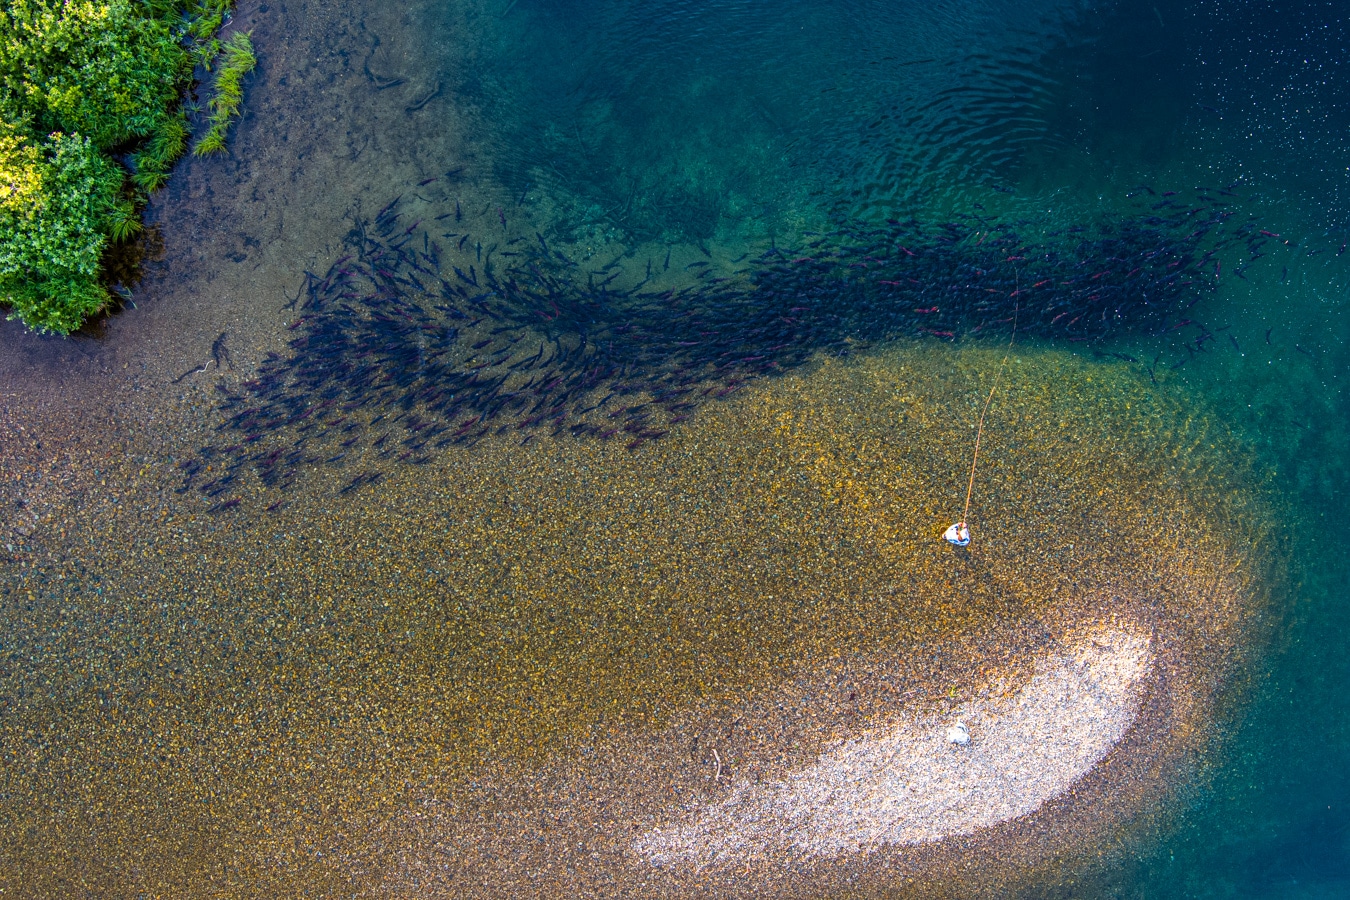 an shot of a man fishing on judd lake from above